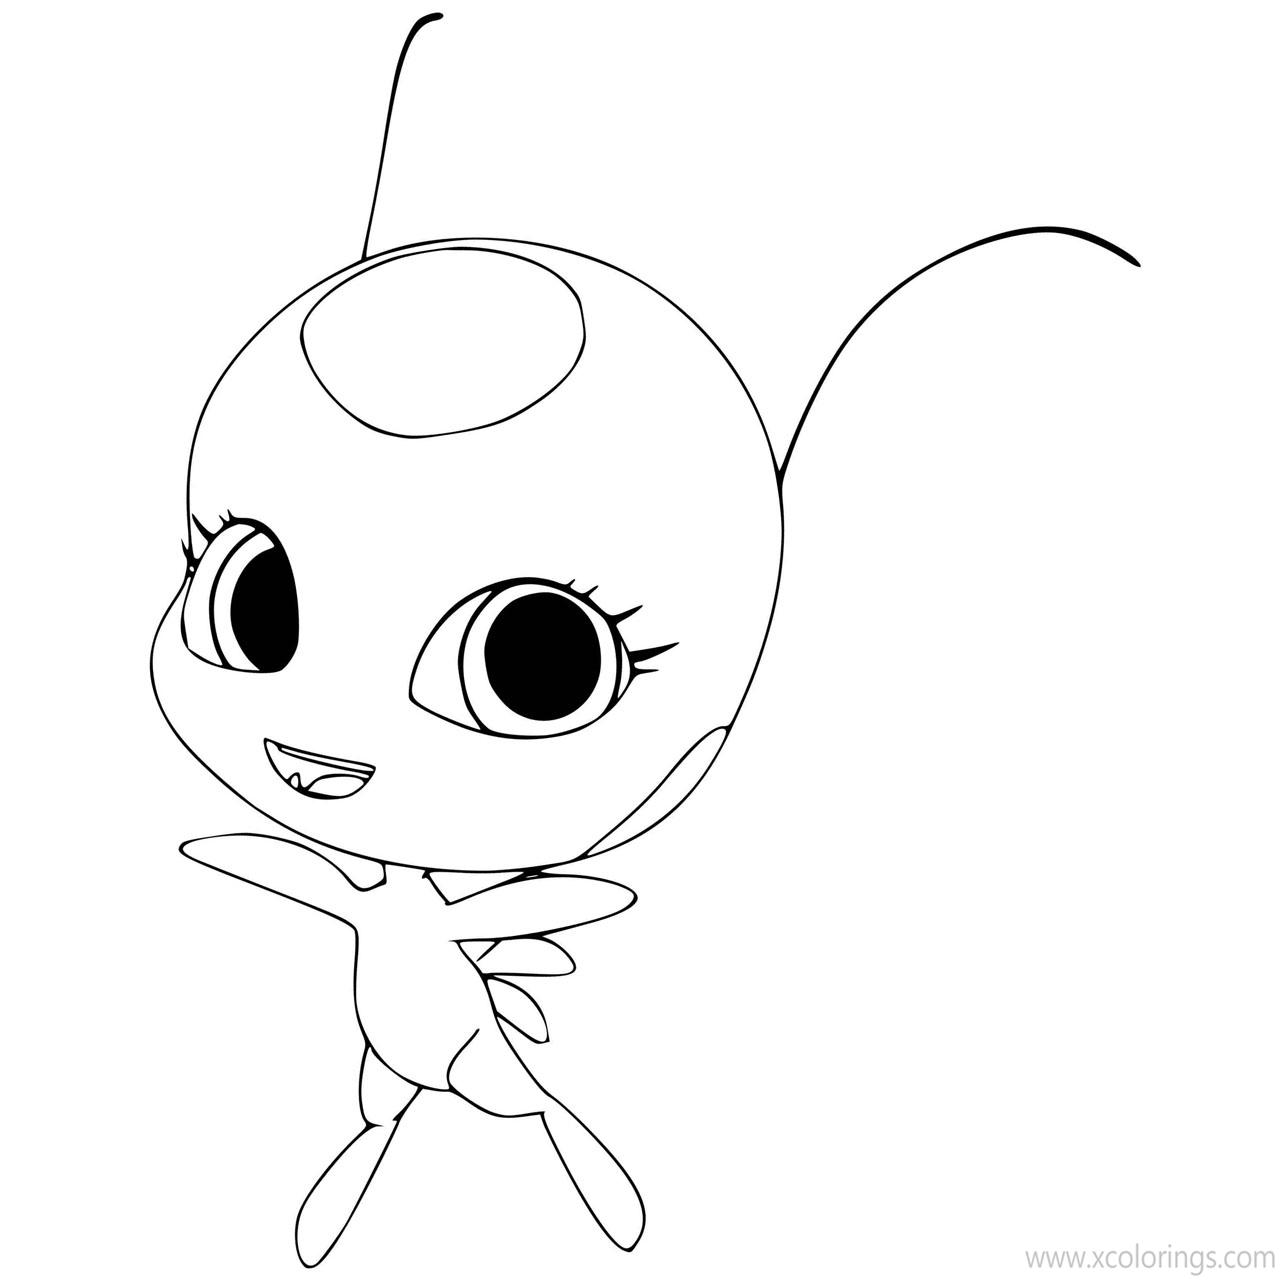 Free Kwami Tikki from Miraculous Ladybug Coloring Pages printable